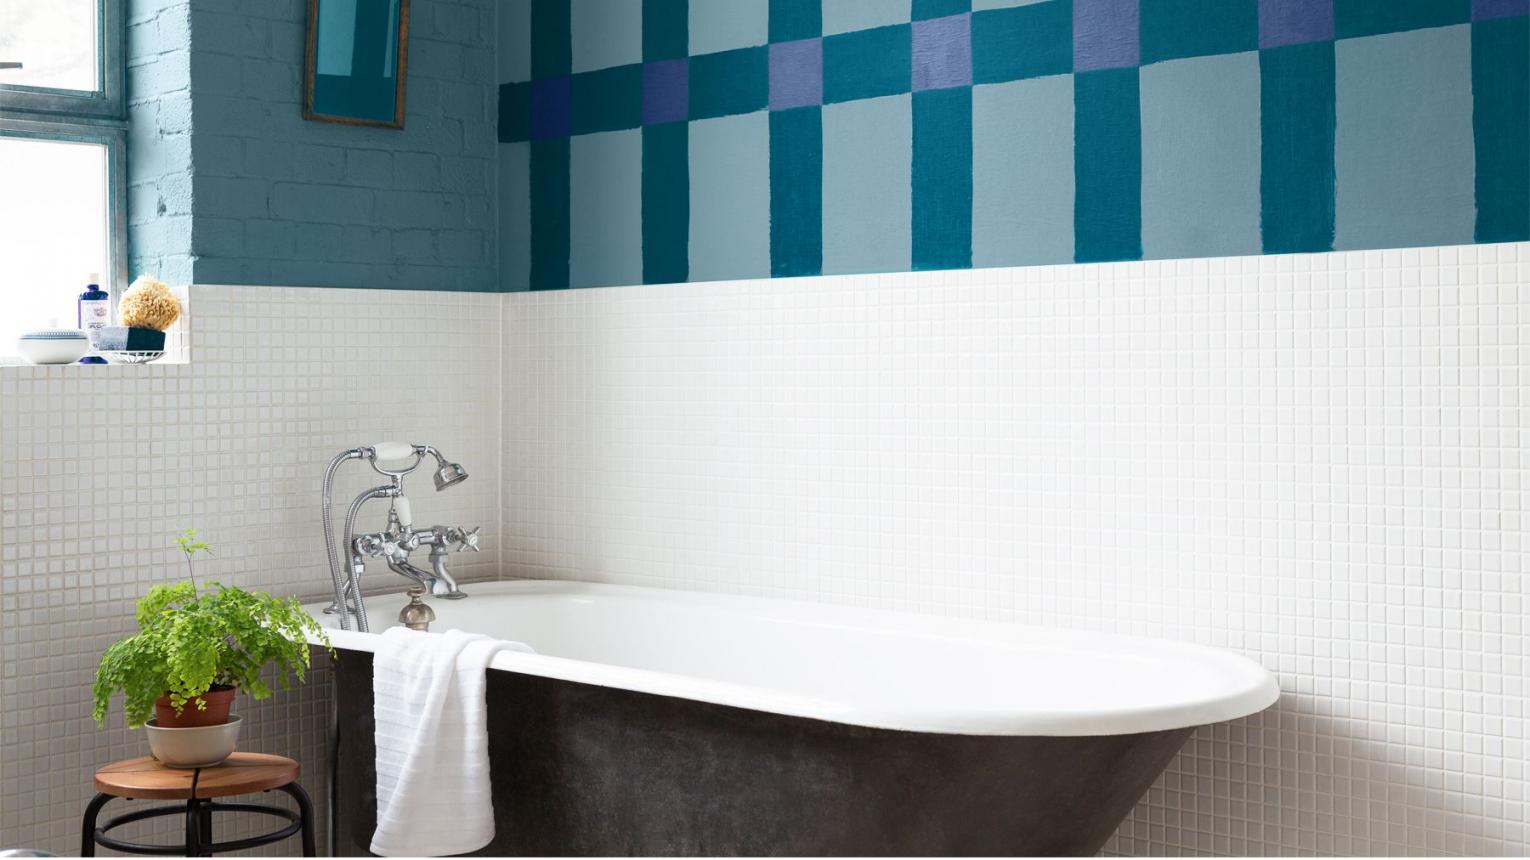 Dr Dulux How To Paint Over Tiles, Can You Change The Color Of Bathroom Tile